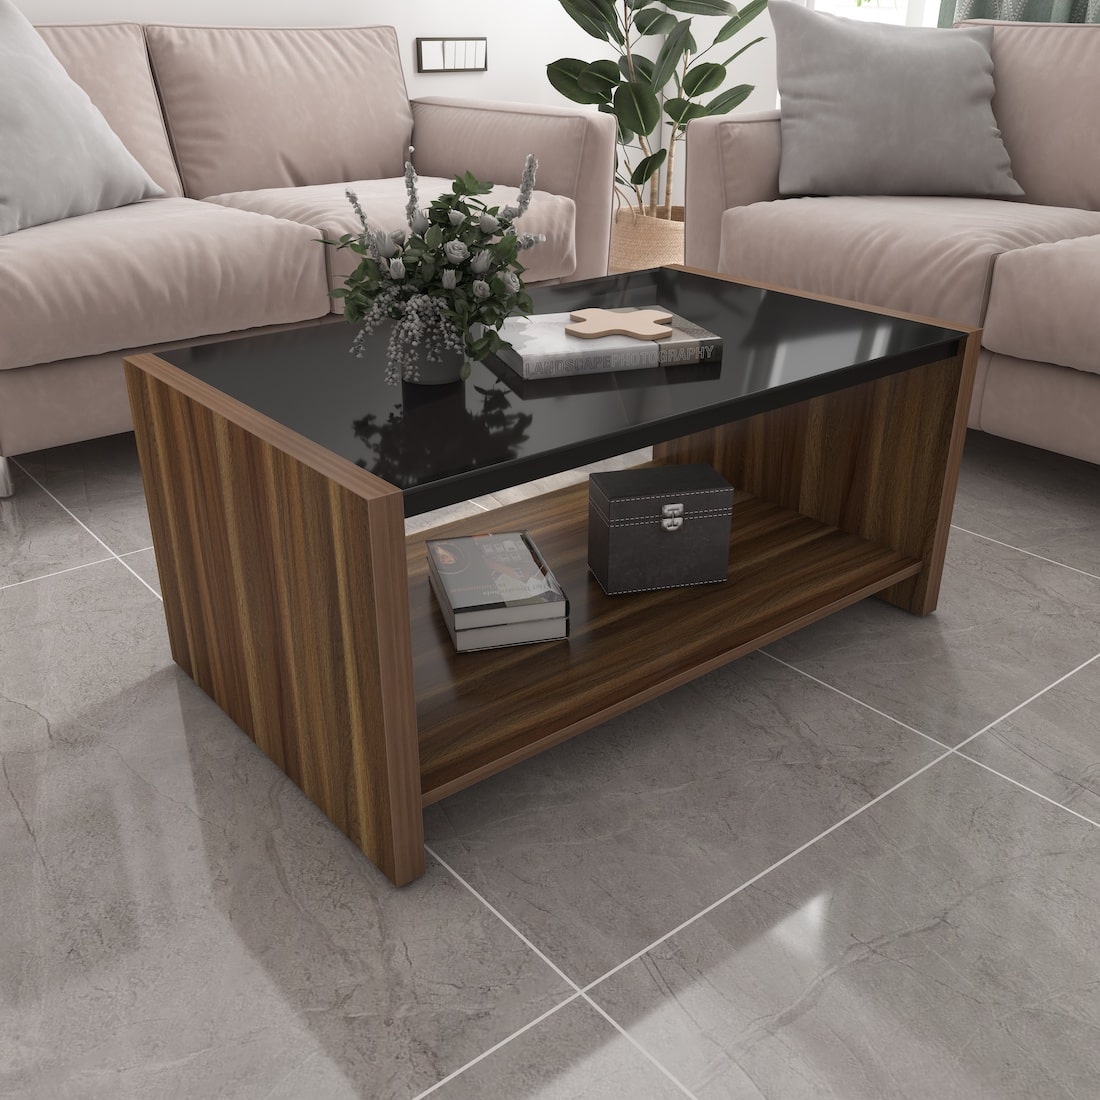 Fusion Compact Coffee Table